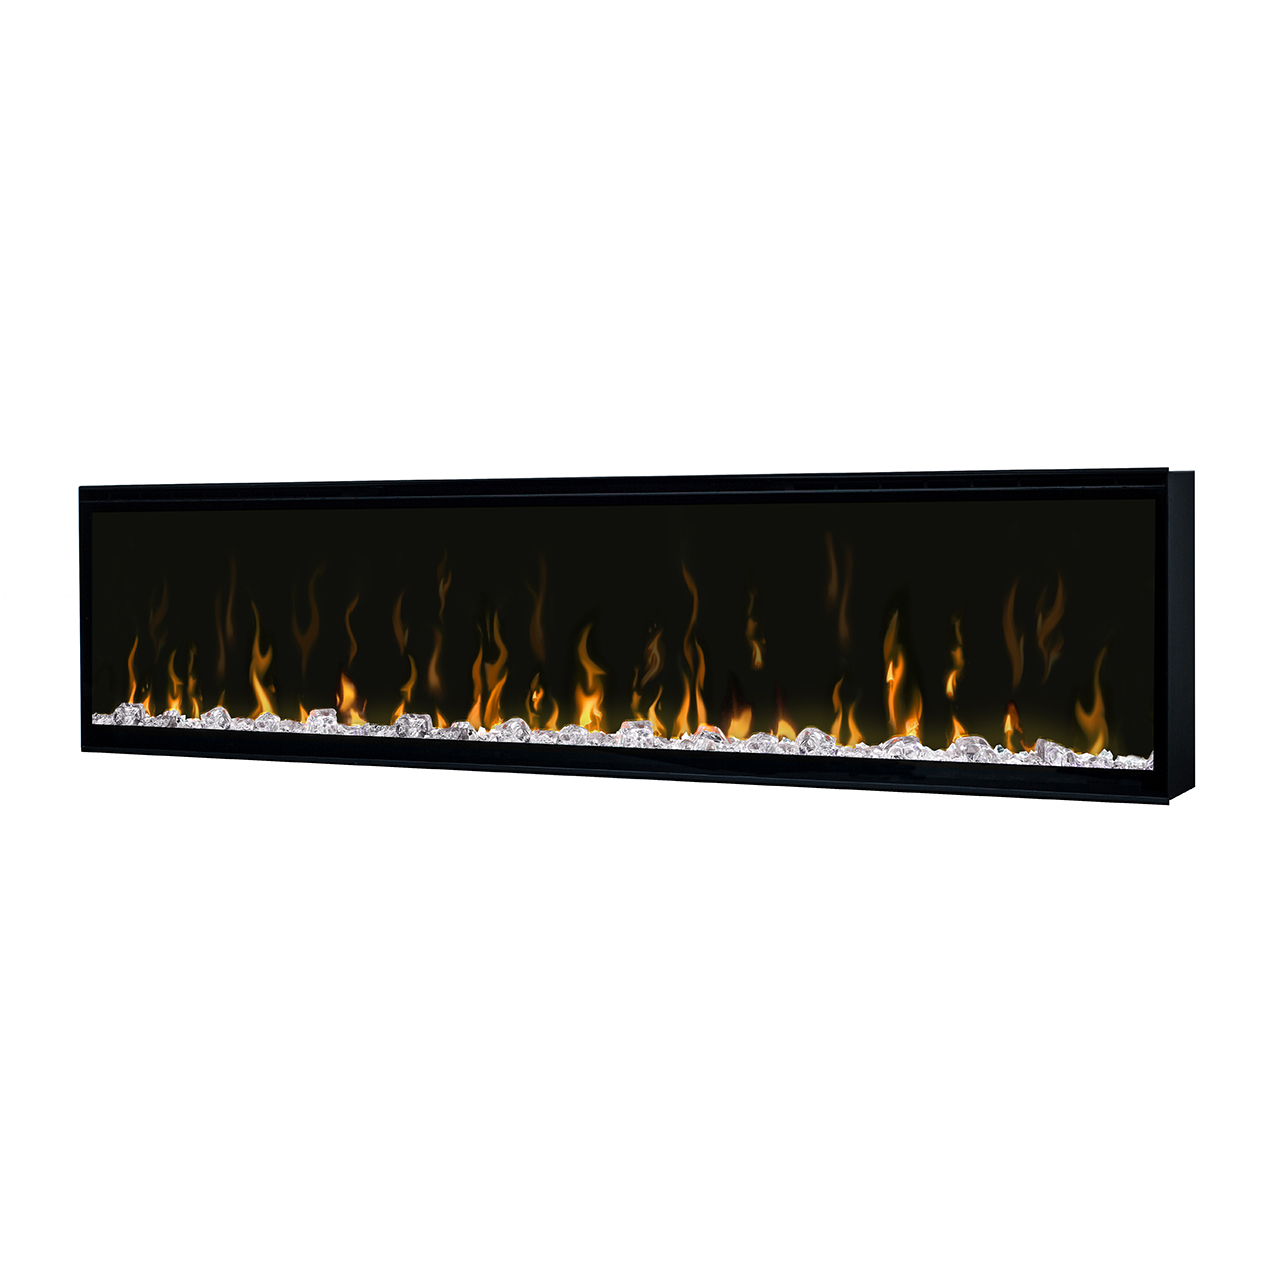 ignitexl 60 inch linear electric fireplace thumbnail image